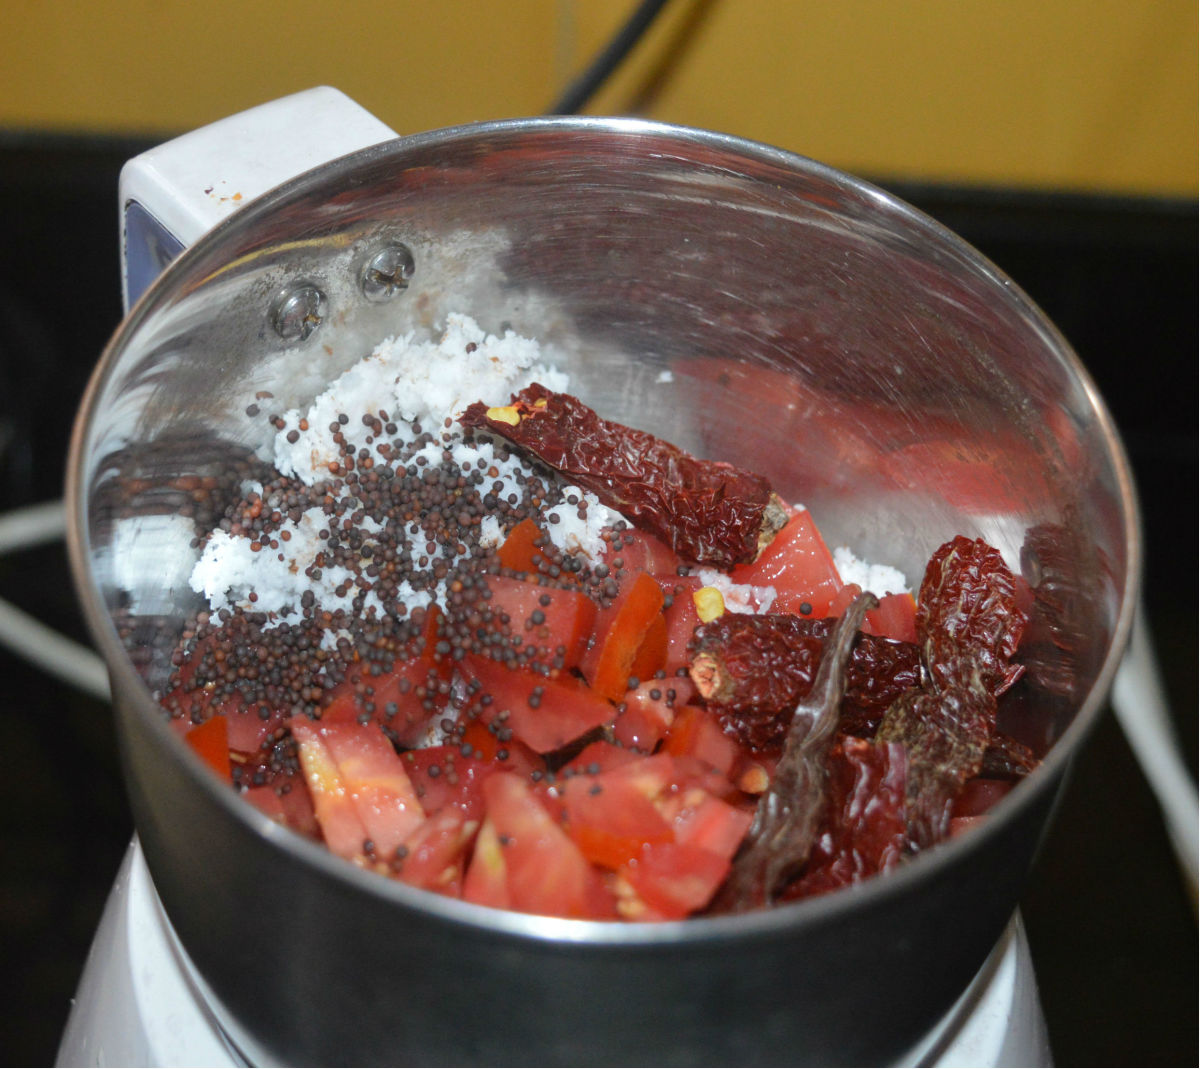 Step two: Add chopped tomatoes, broken dry red chilies, coconut gratings, and mustard seeds to a mixer jar. Grind to get a smooth paste. Add only a very small amount if needed. Set aside.